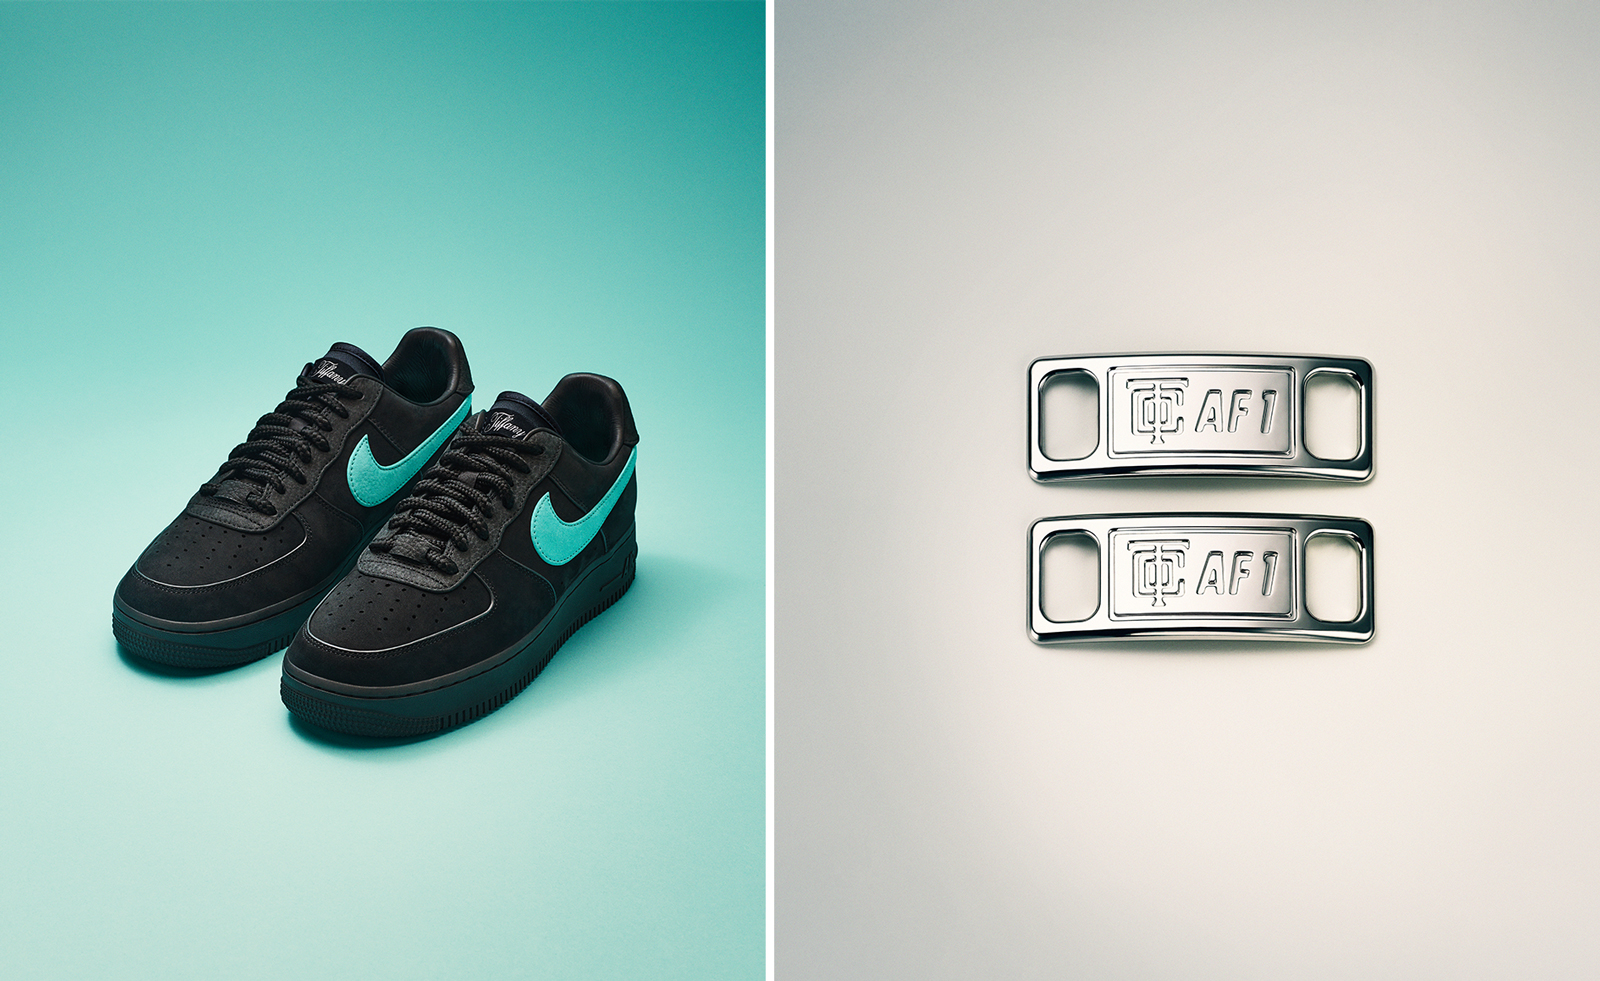 Tiffany & Co. Nike x Tiffany and Co. Air Force 1 Low and .925 Silver Tiffany Accessories | Size 7, Sneaker